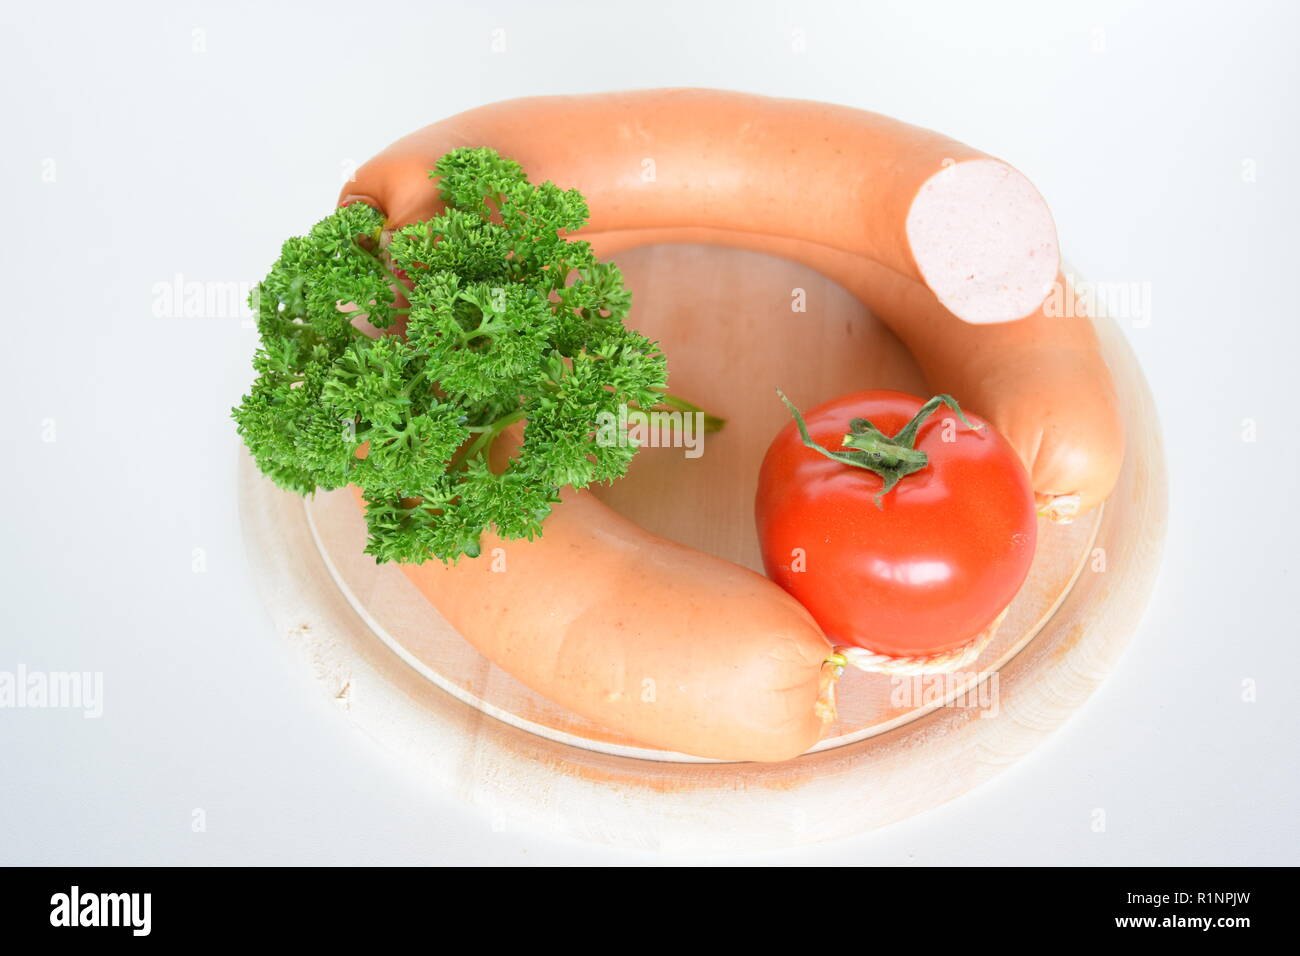 Alamy images and hi-res Fleischwurst - stock photography